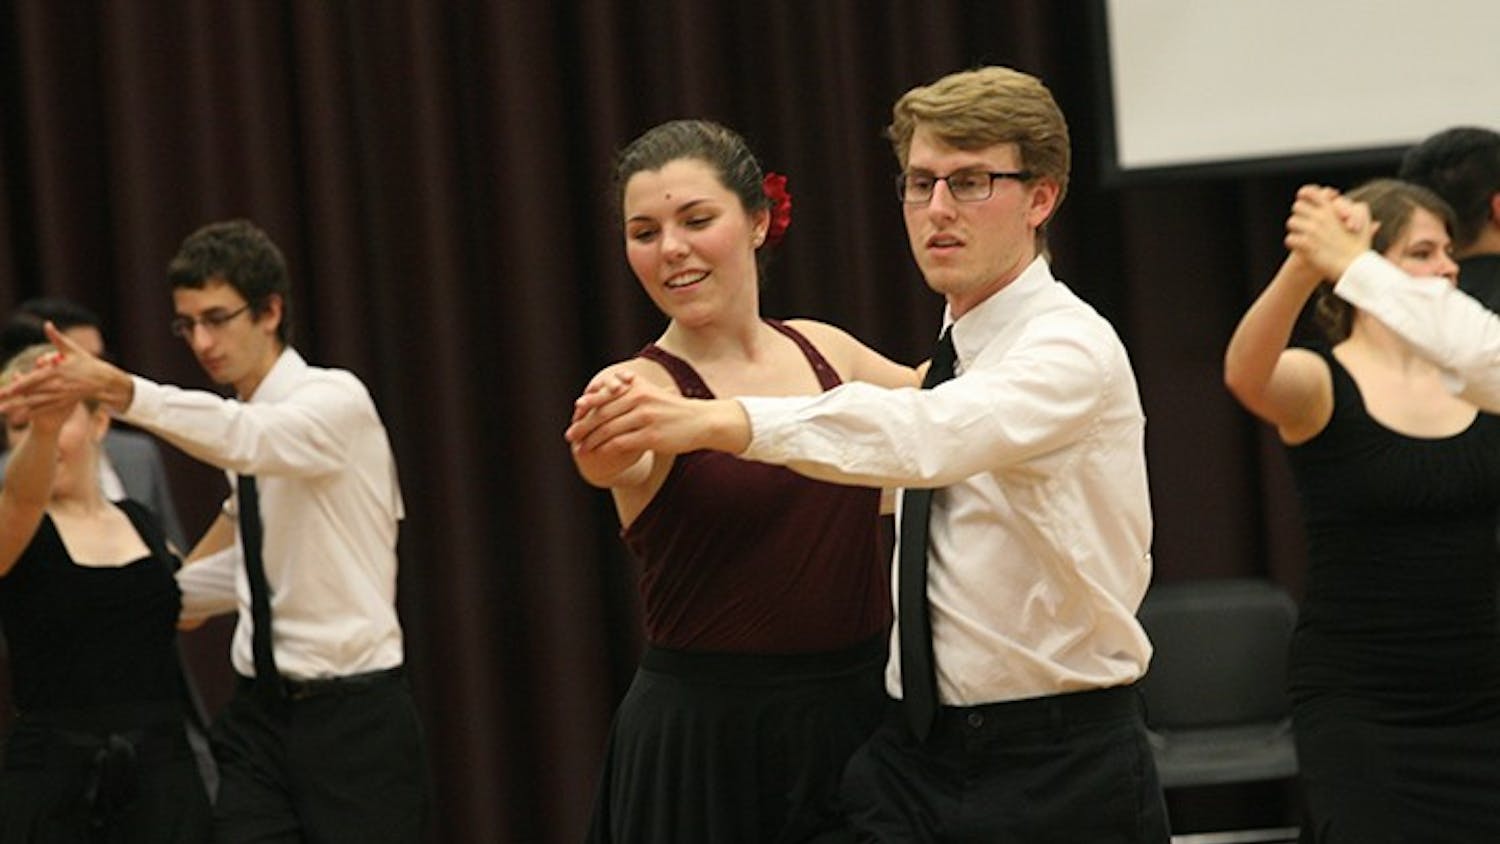 Carter Little, junior public health major, and Andrew Lopiano, junior political science and English double major, compete in Gamecock Invitational Ballroom Dance Competition.